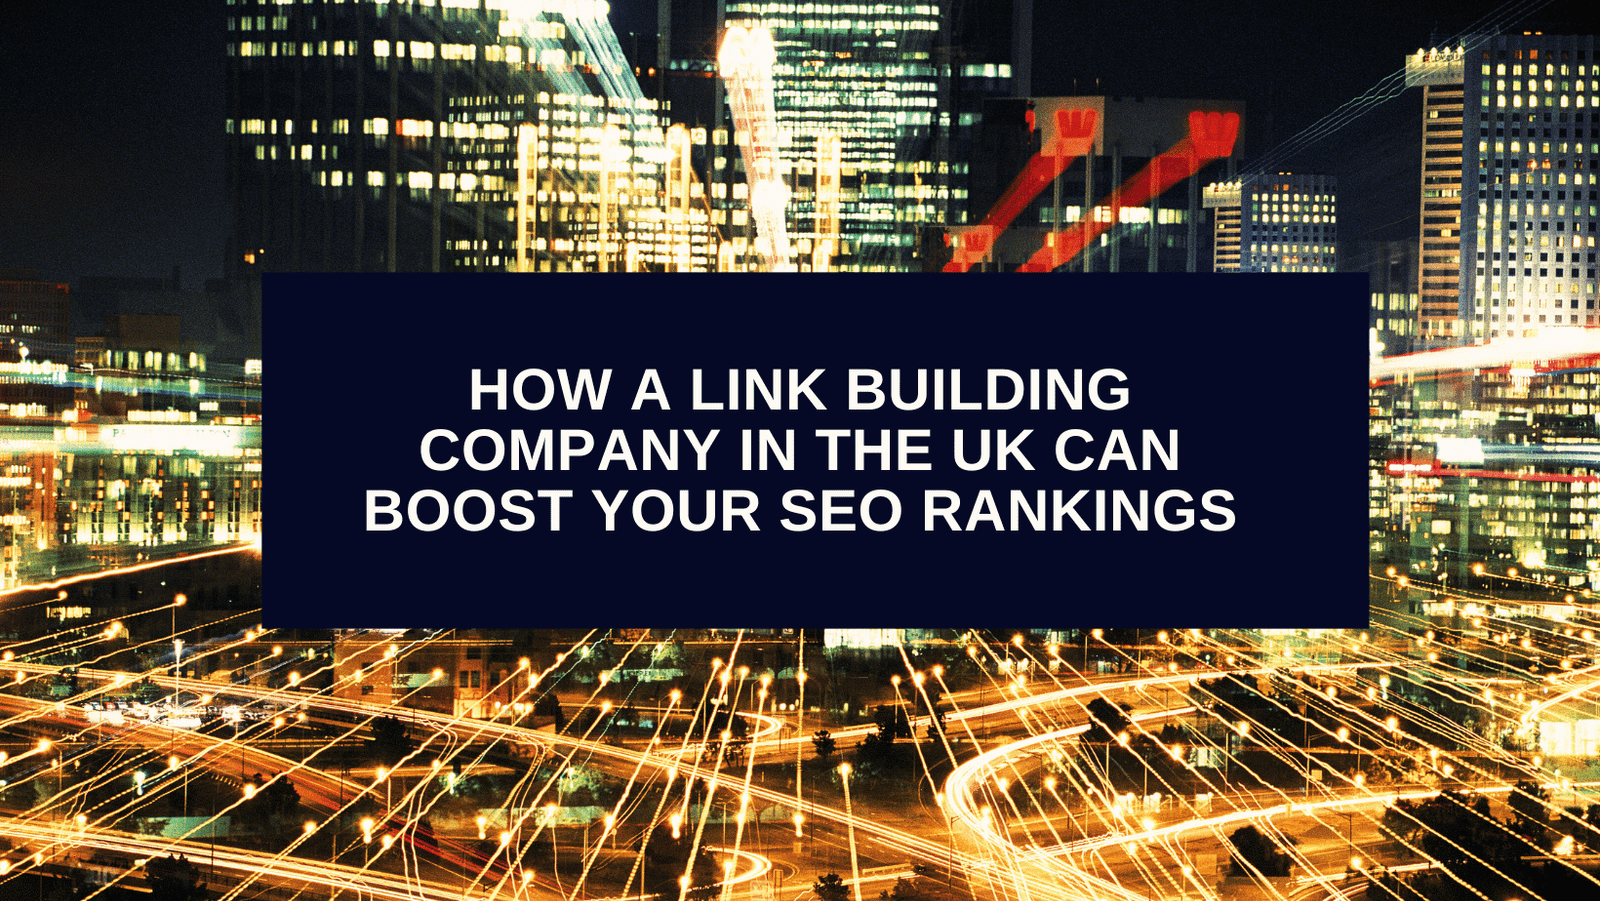 How a Link Building Company in the UK Can Boost Your SEO Rankings